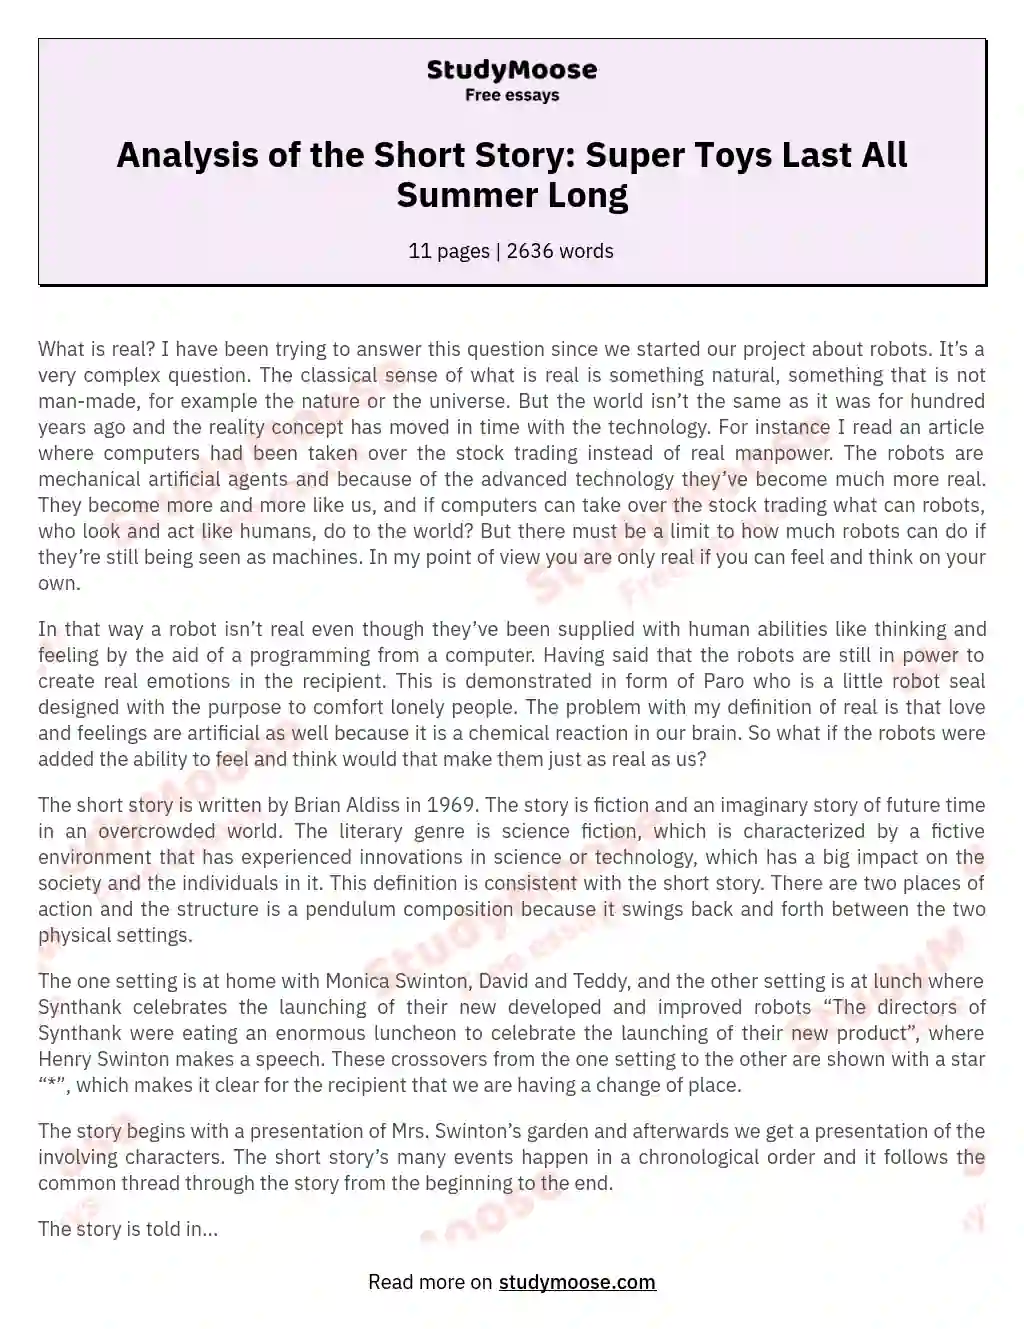 Analysis of the Short Story: Super Toys Last All Summer Long essay